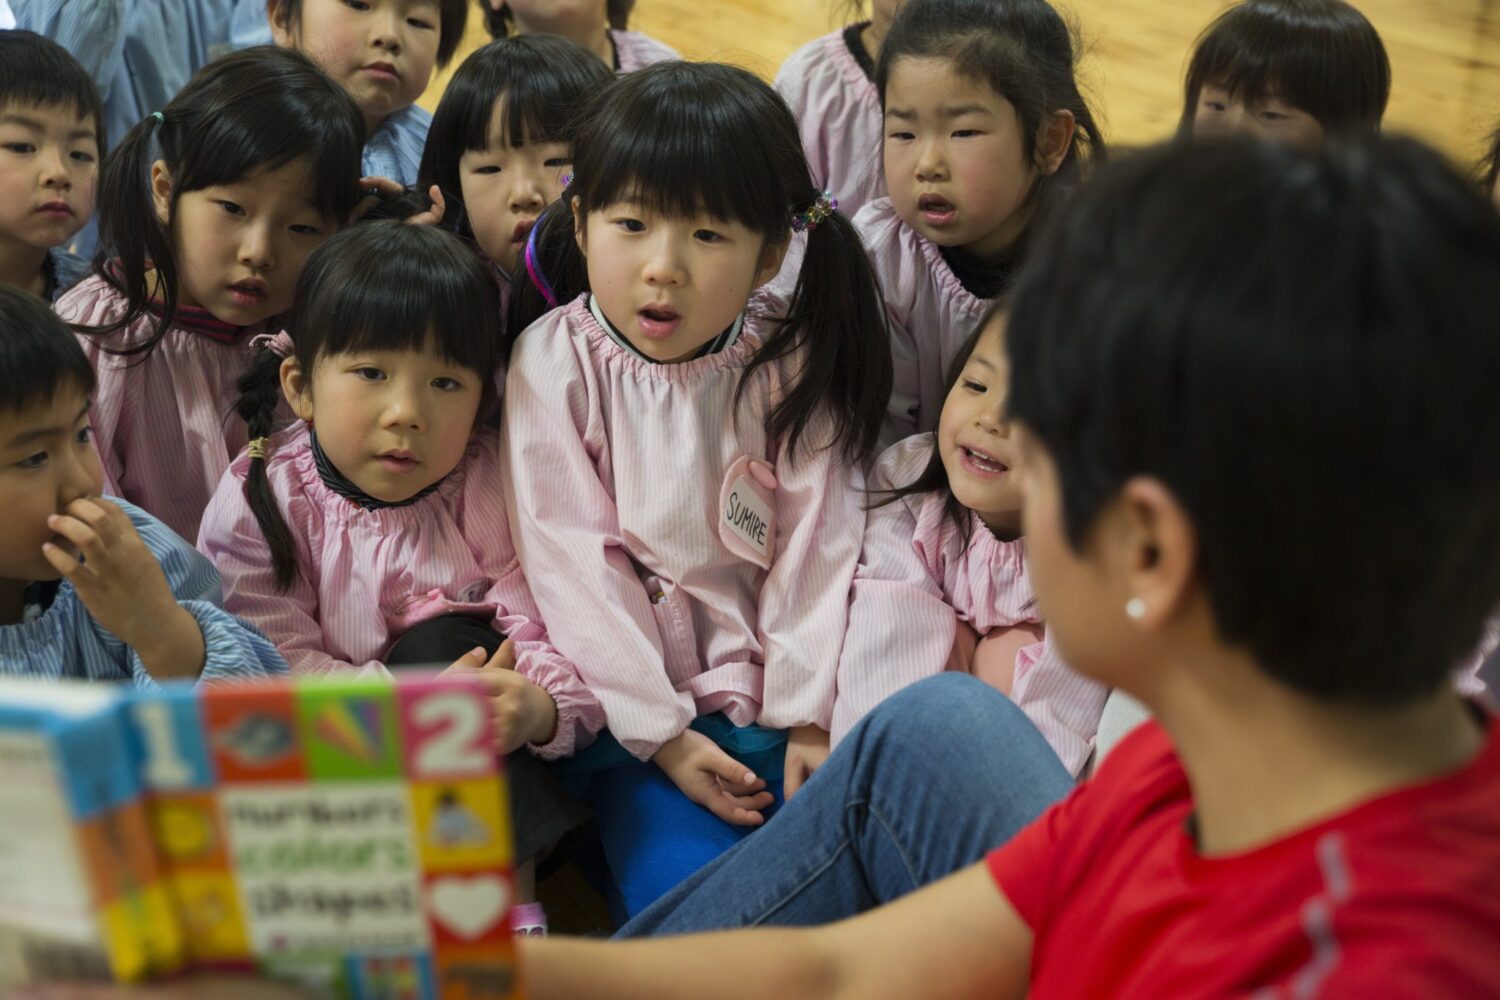 Japanese preschool students listening to the teacher reading a book